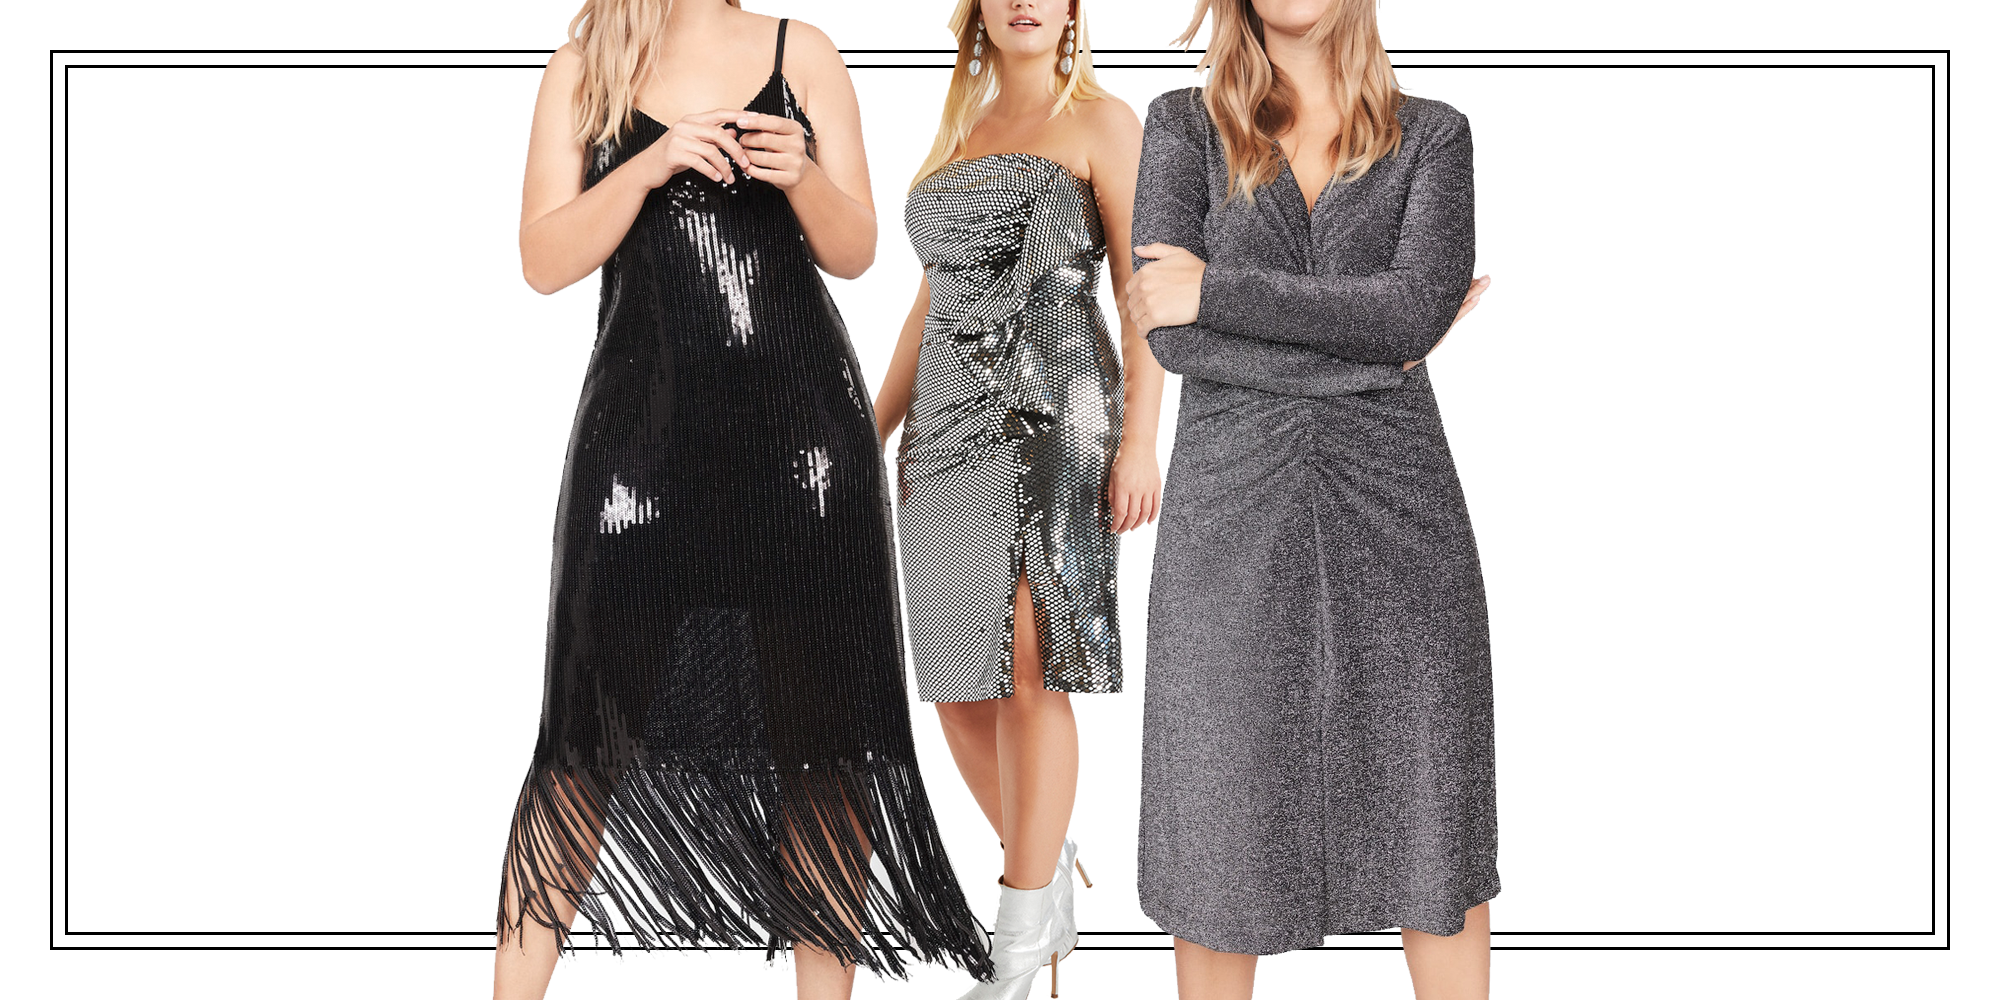 10+ Gorgeous New Years' Eve Dresses To Be the Best Dressed - Christina Bee